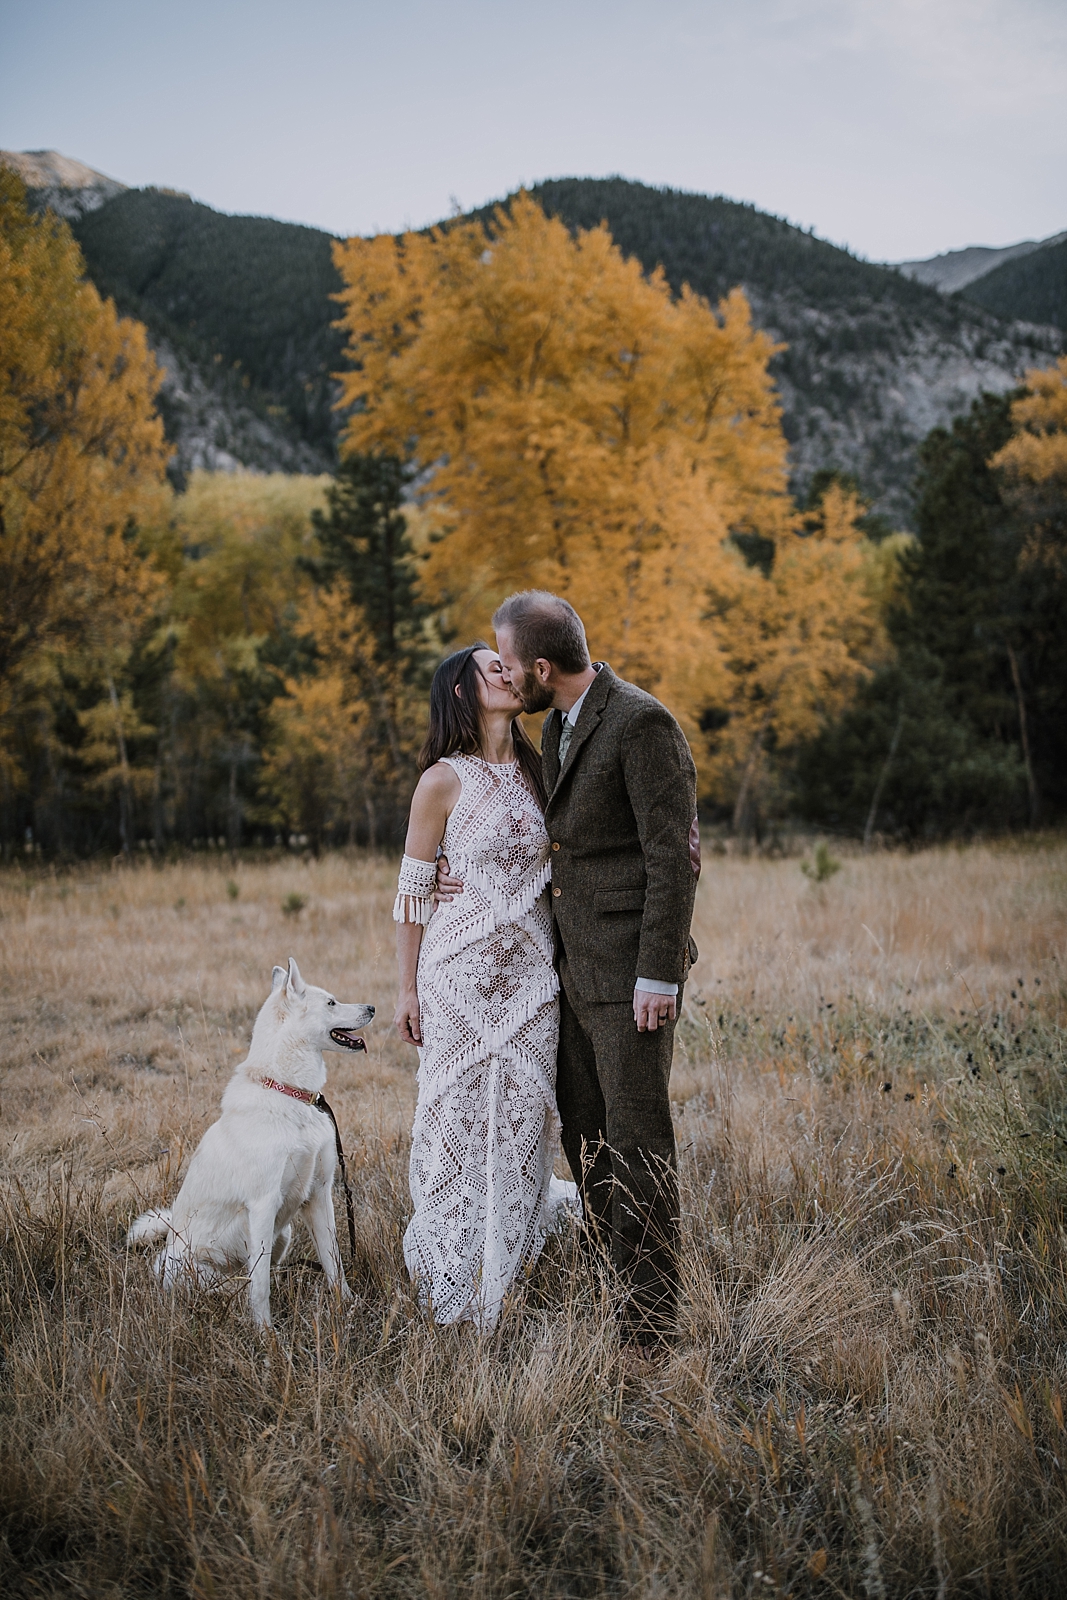 blue eyed husky, couple hiking, norway elopement, post elopement celebration, wedding in the woods, buena vista elopement, buena vista wedding, nathrop colorado wedding, elope with your dog